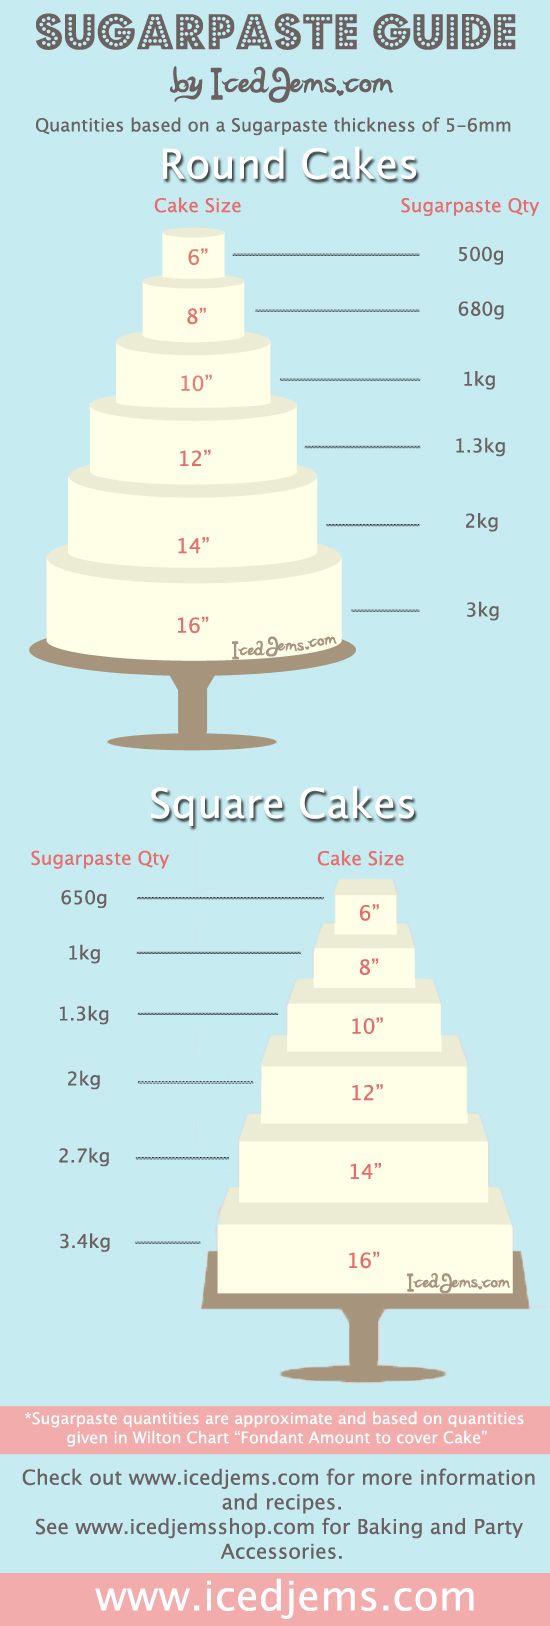 How much Sugarpaste / Fondant you need to cover a cake.: